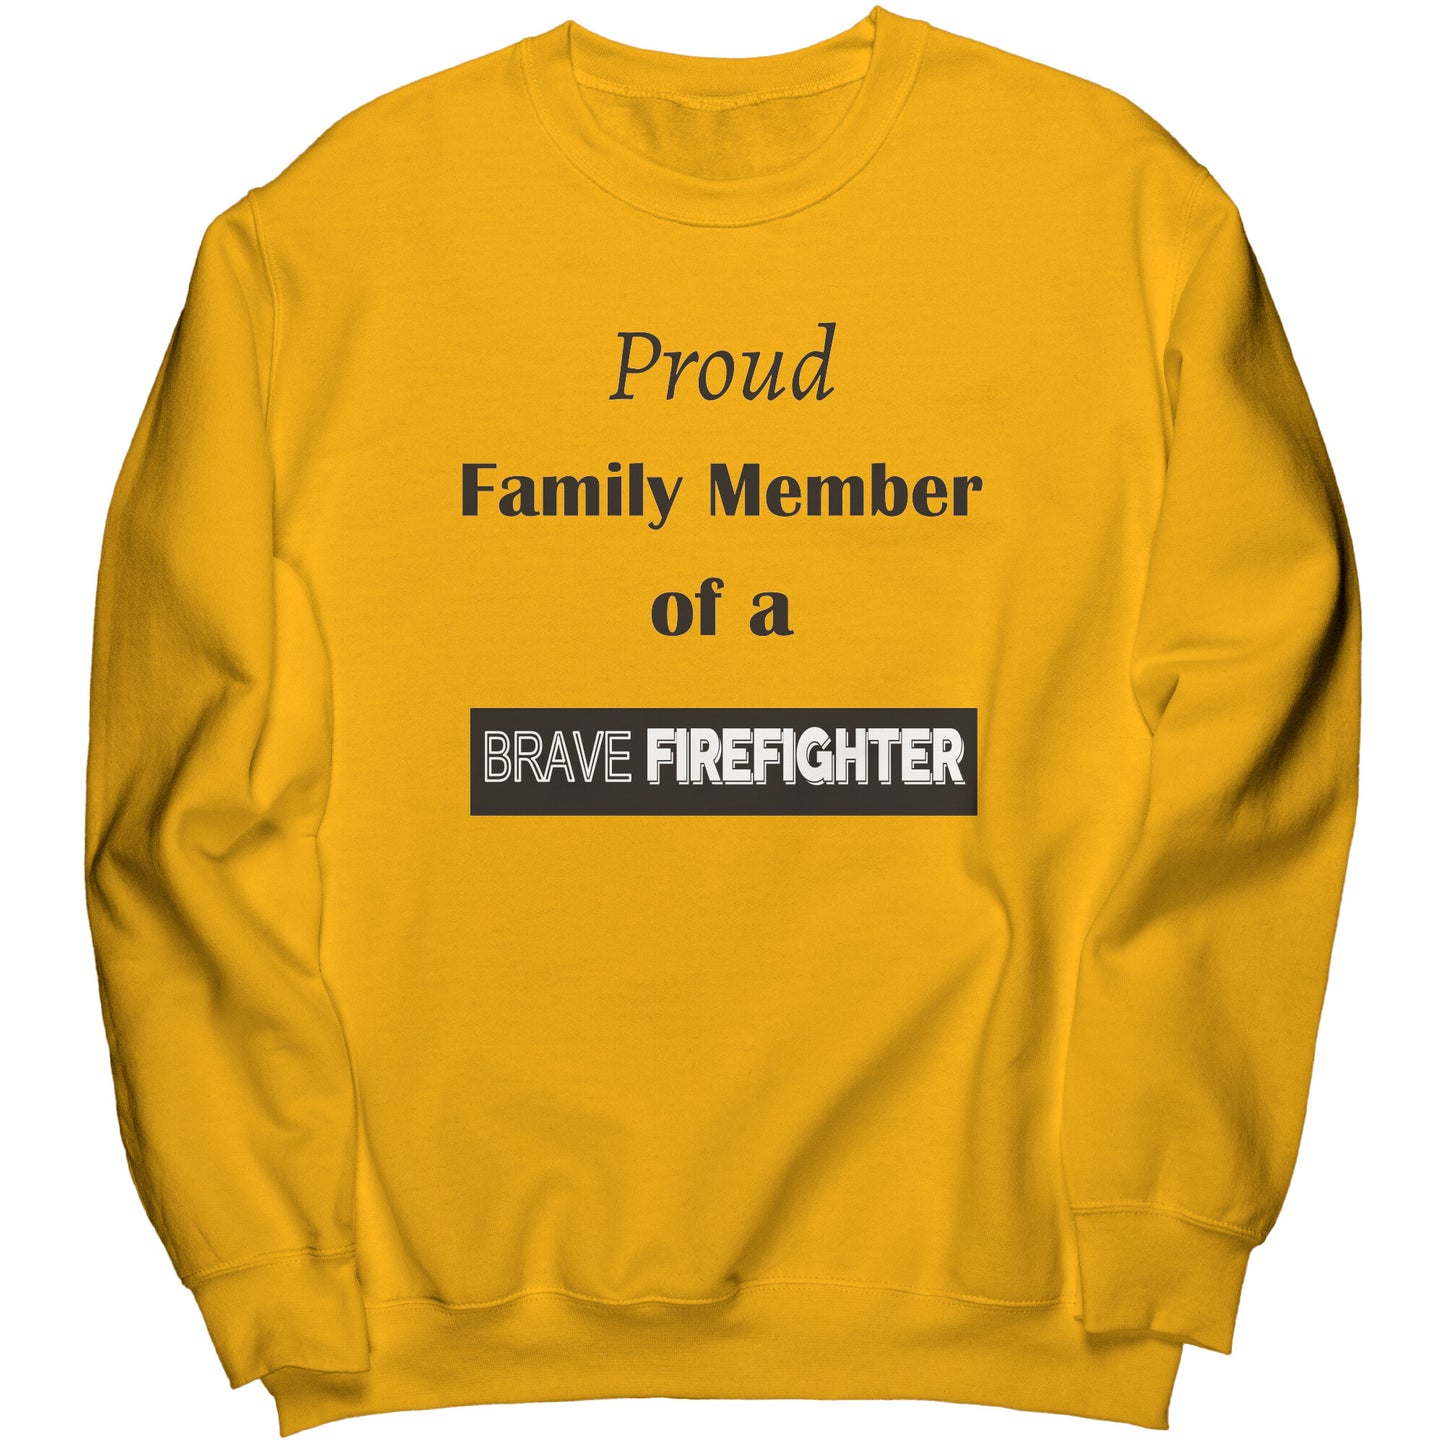 Proud Family Member of a Brave Firefighter Lettering Sweatshirt - Signs and Seasons Gifts